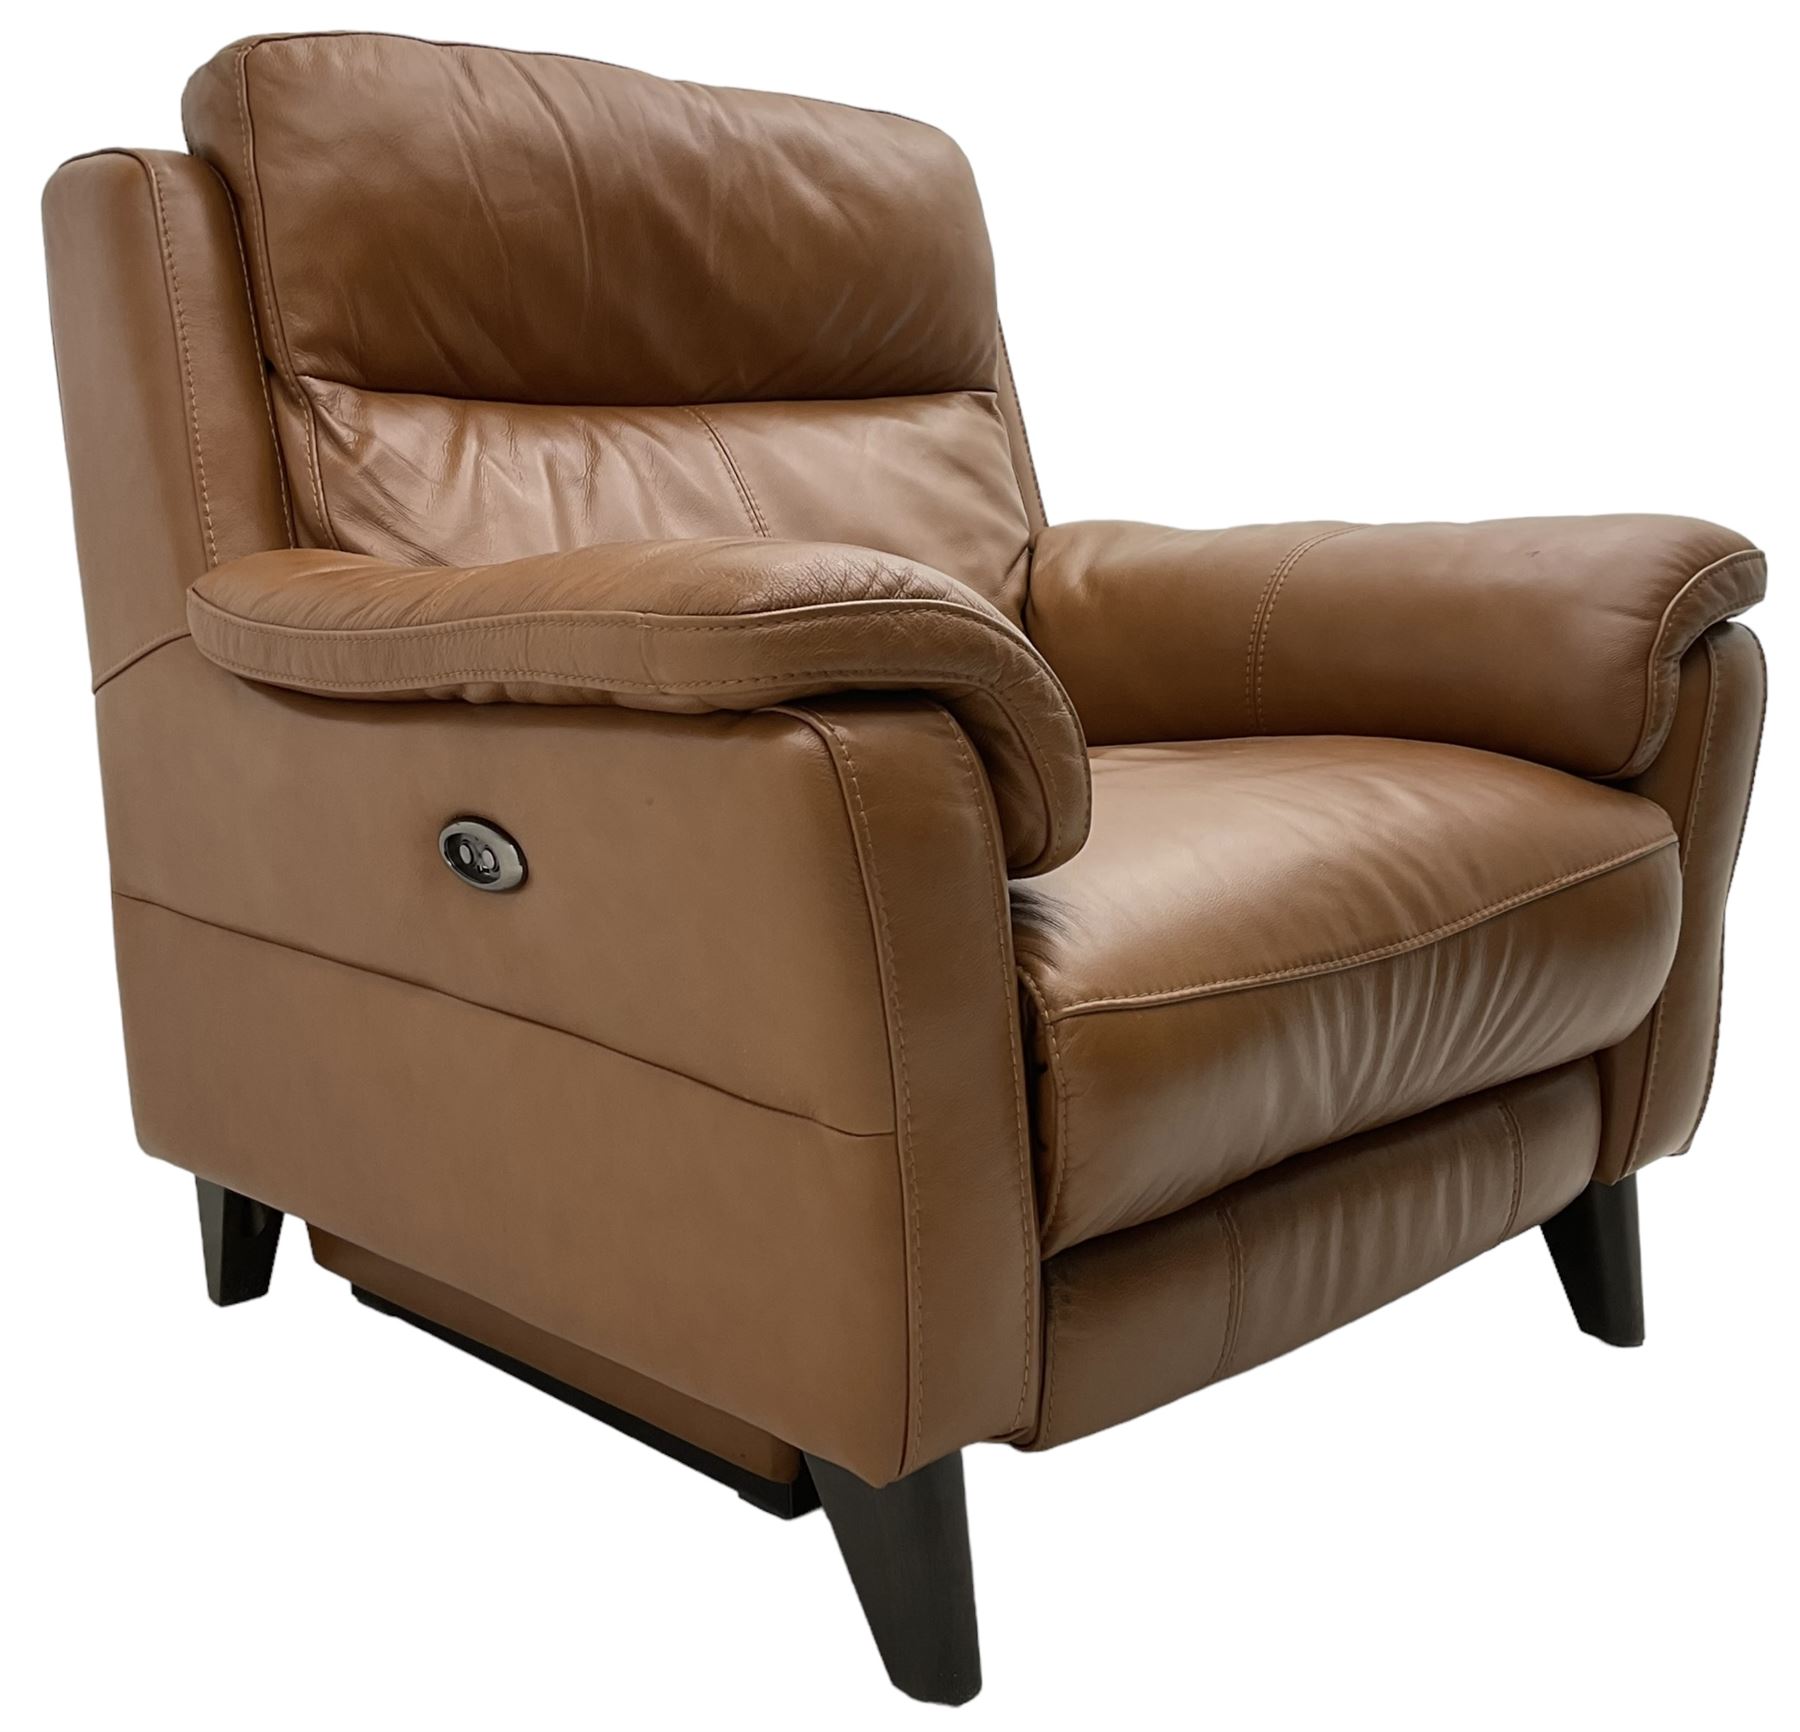 Electric reclining armchair - Image 3 of 6